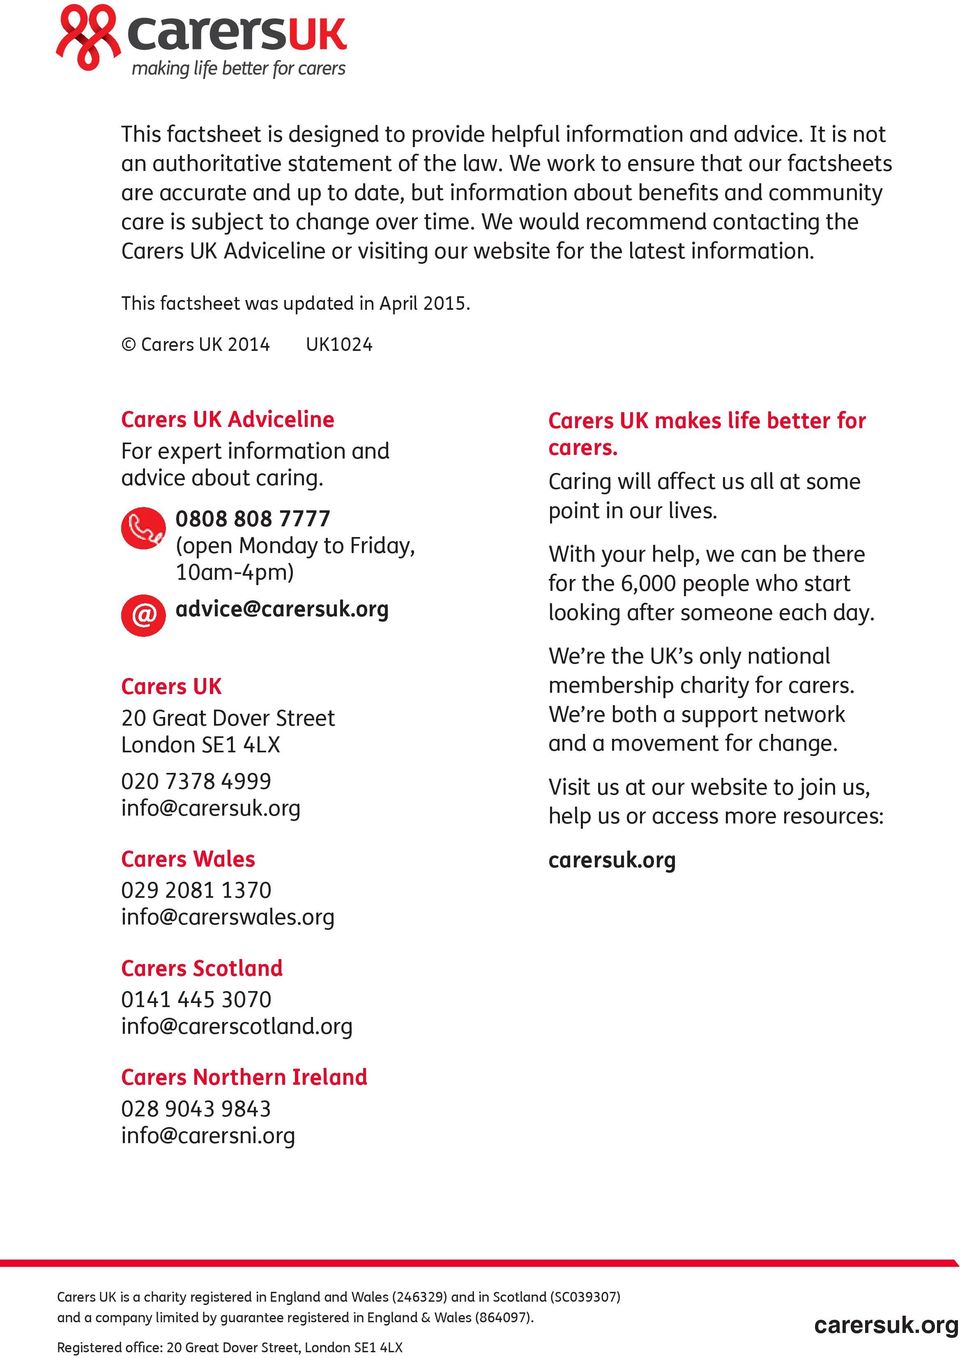 We would recommend contacting the Carers UK Adviceline or visiting our website for the latest information. This factsheet was updated in April 2015.